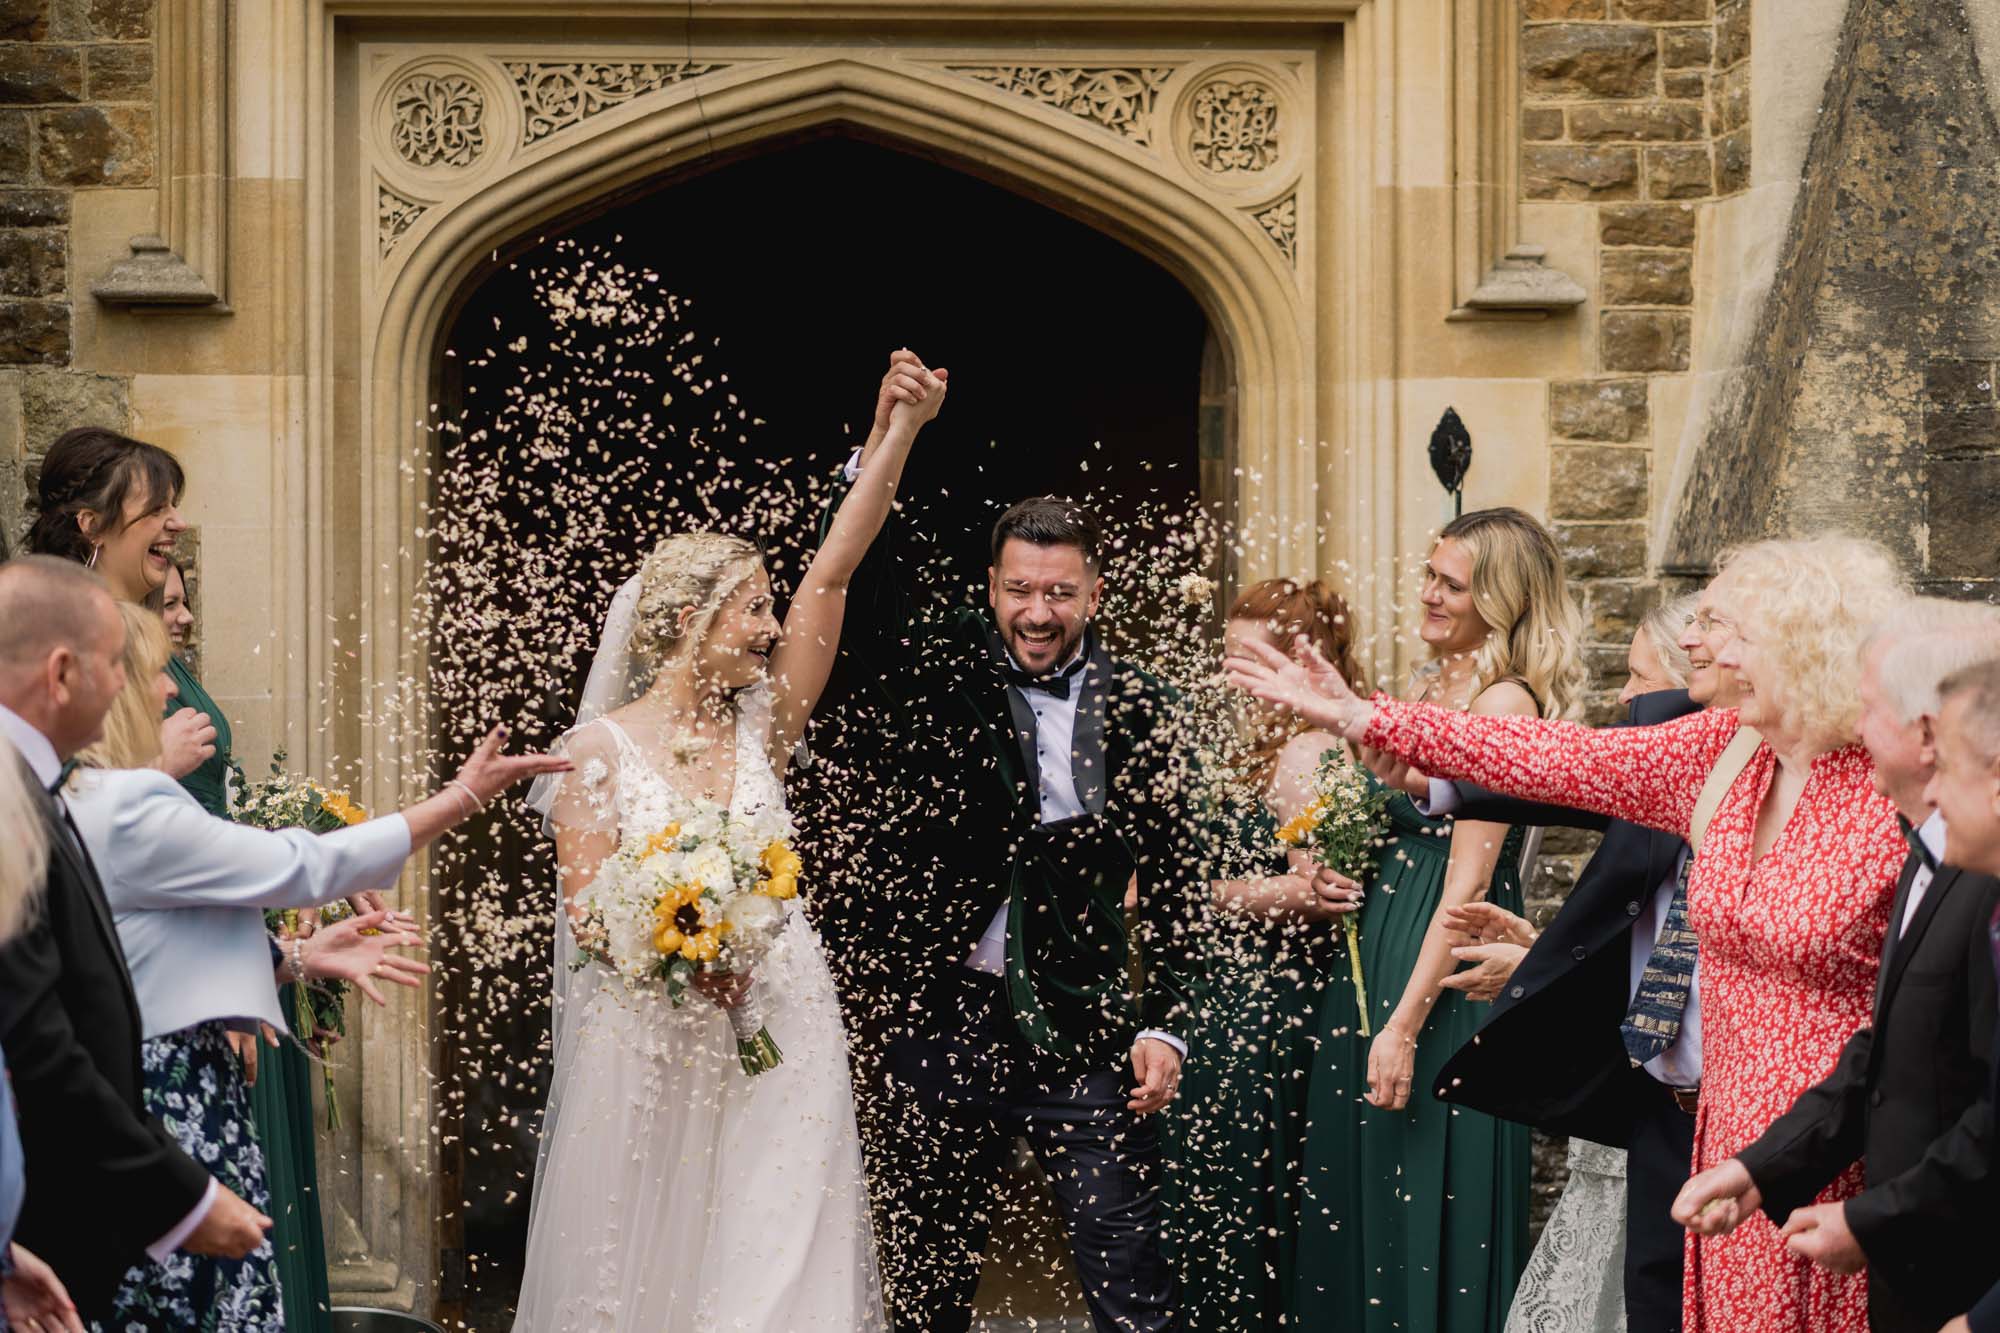 Wedding guests throw confetti at the bride and groom on their wedding day at Hartsfield Manor.